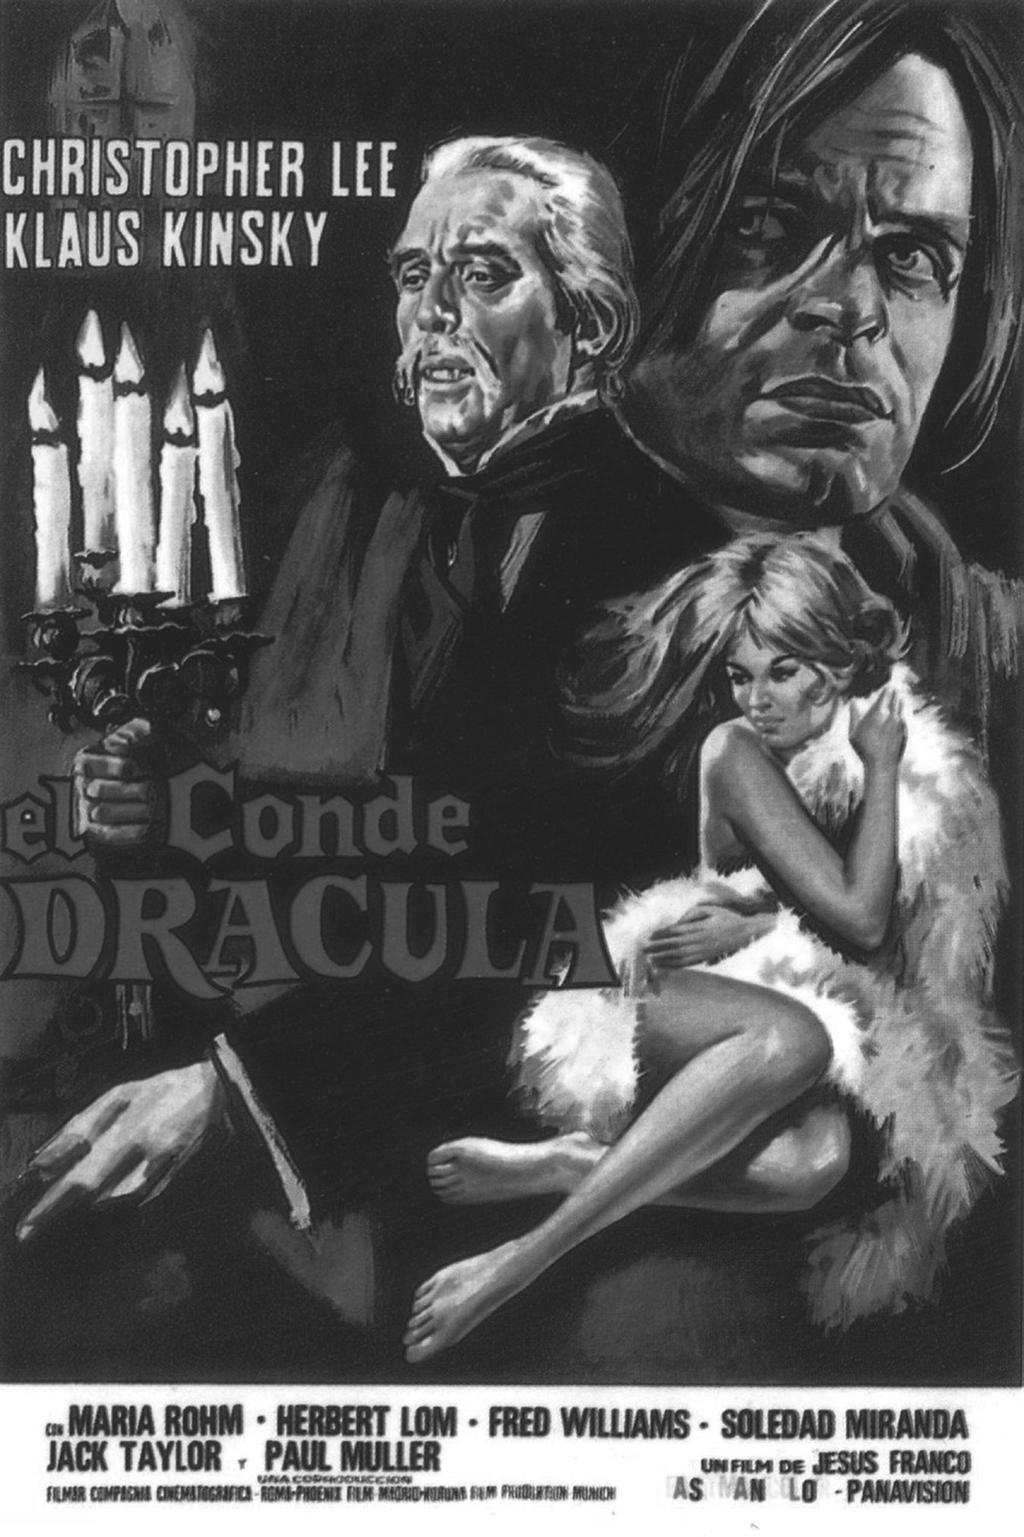 The Second The Lifetime Second Lifetime Count Dracula subsections (1970) impotence), Monsignor Muller makes a great foil for Dracula.